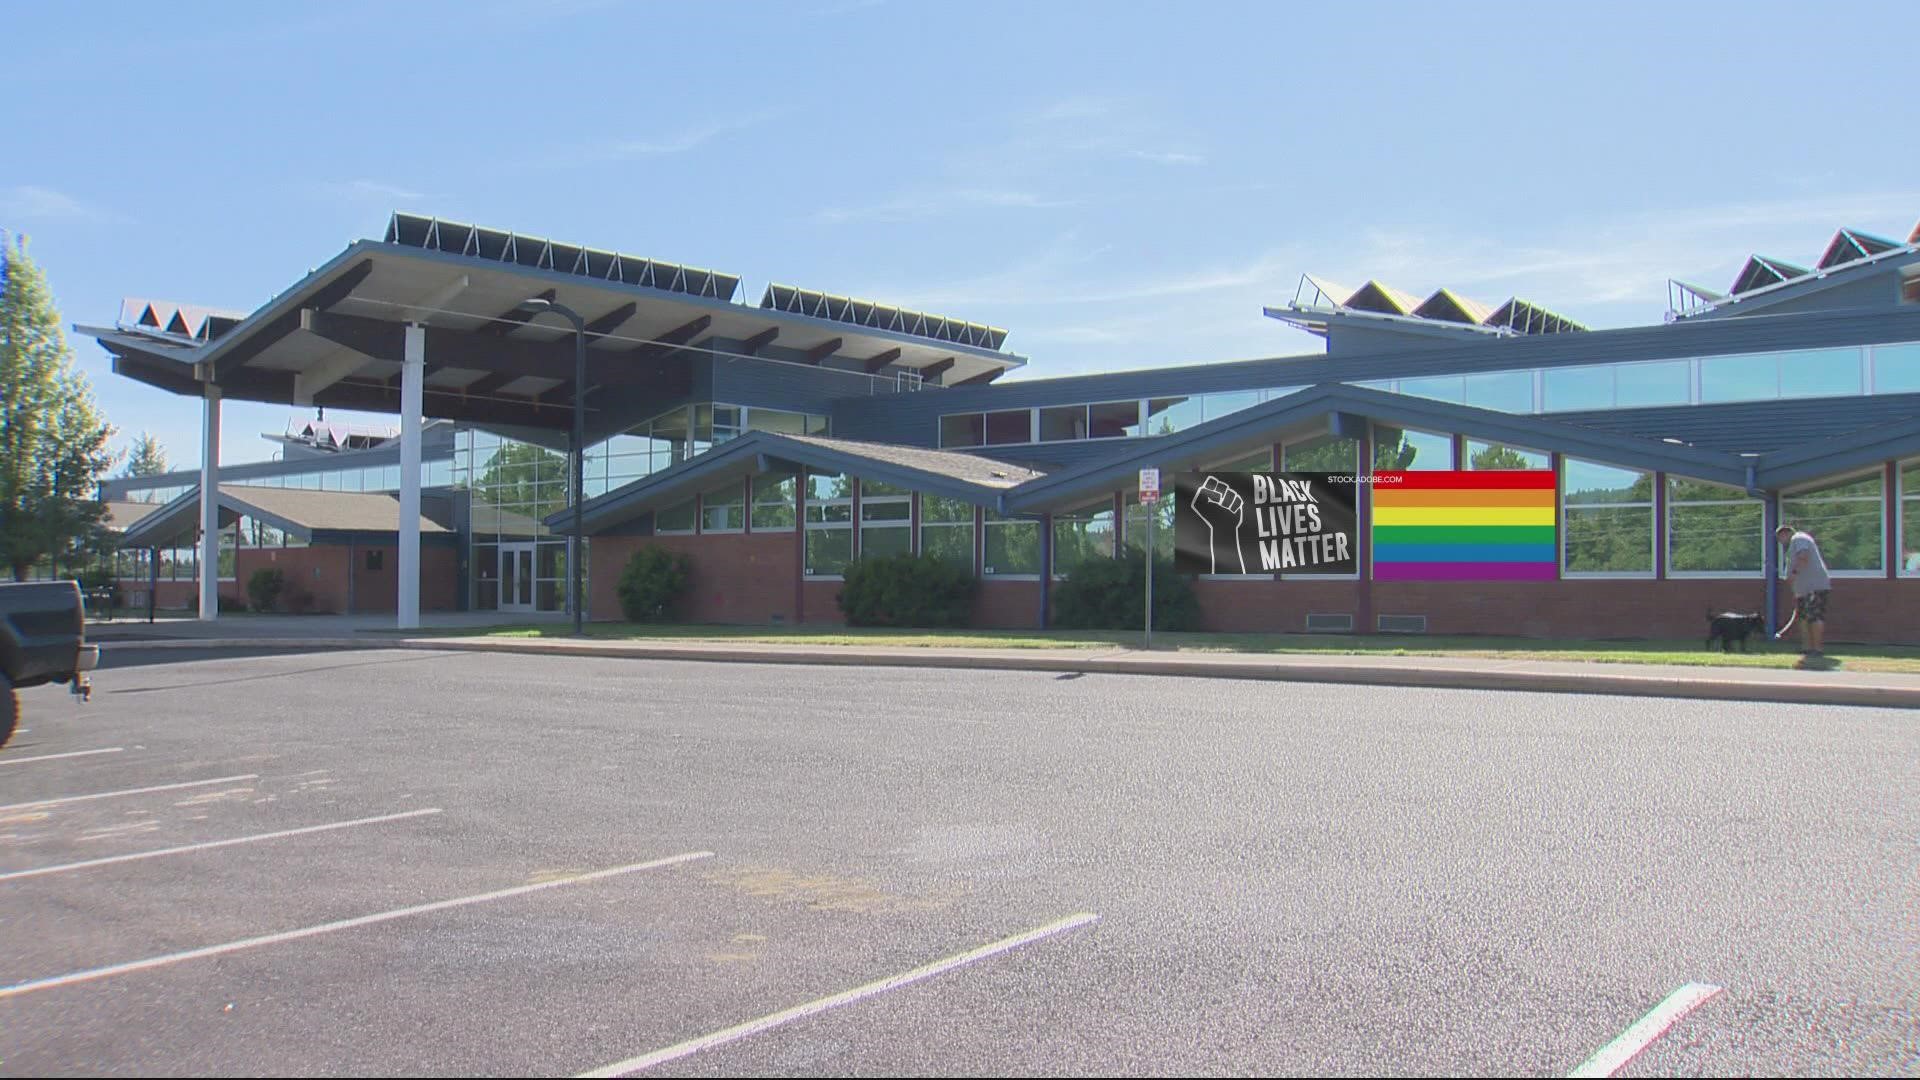 The board voted in favor of banning Pride and BLM symbols in schools at a meeting in early August.